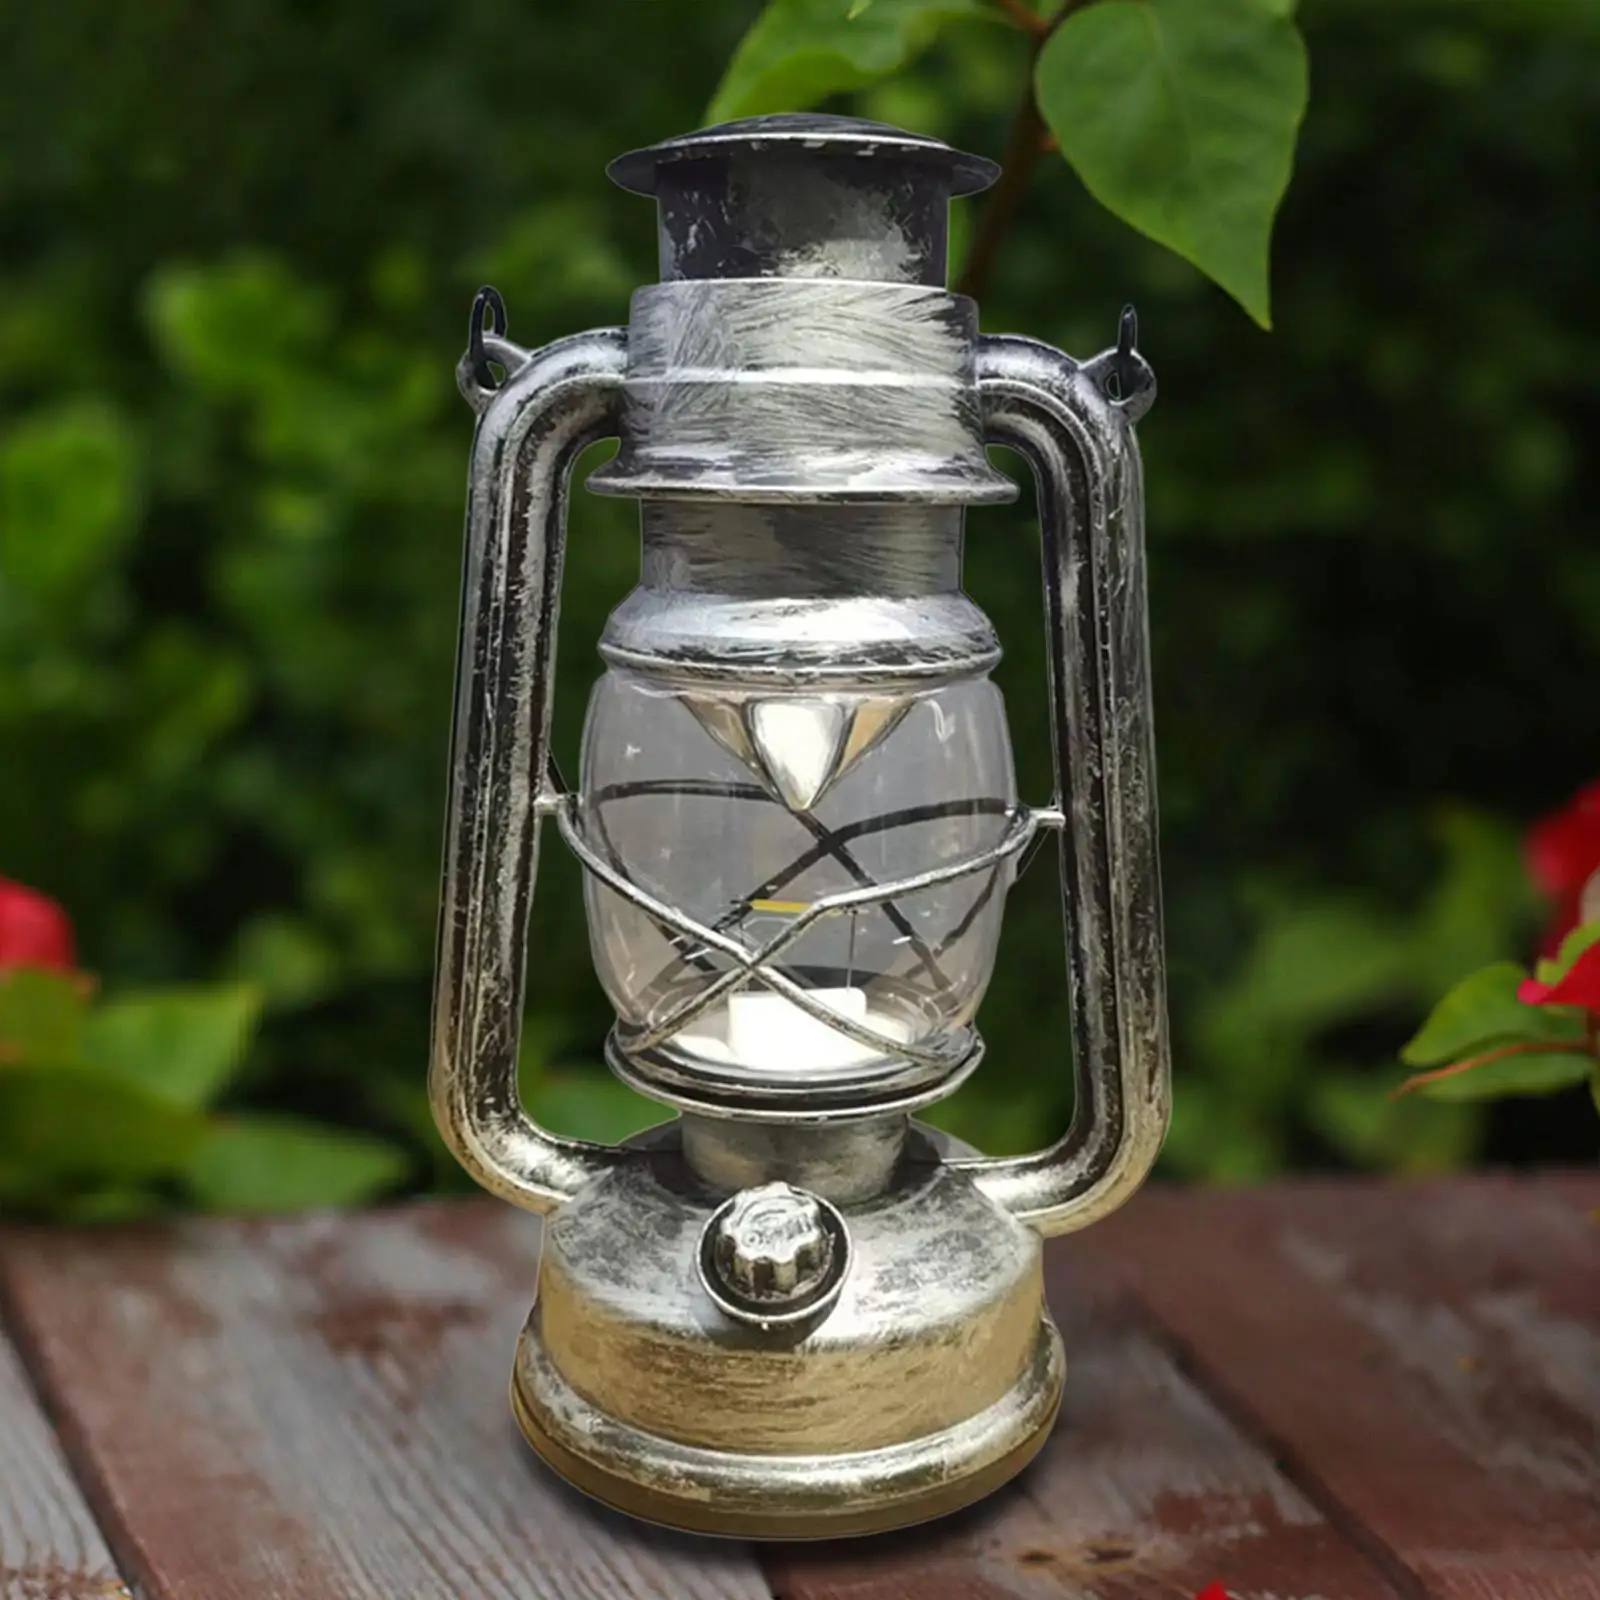 Retro Style Oil Lamp Table Lantern Outdoor Camping Tent Light for Emergency